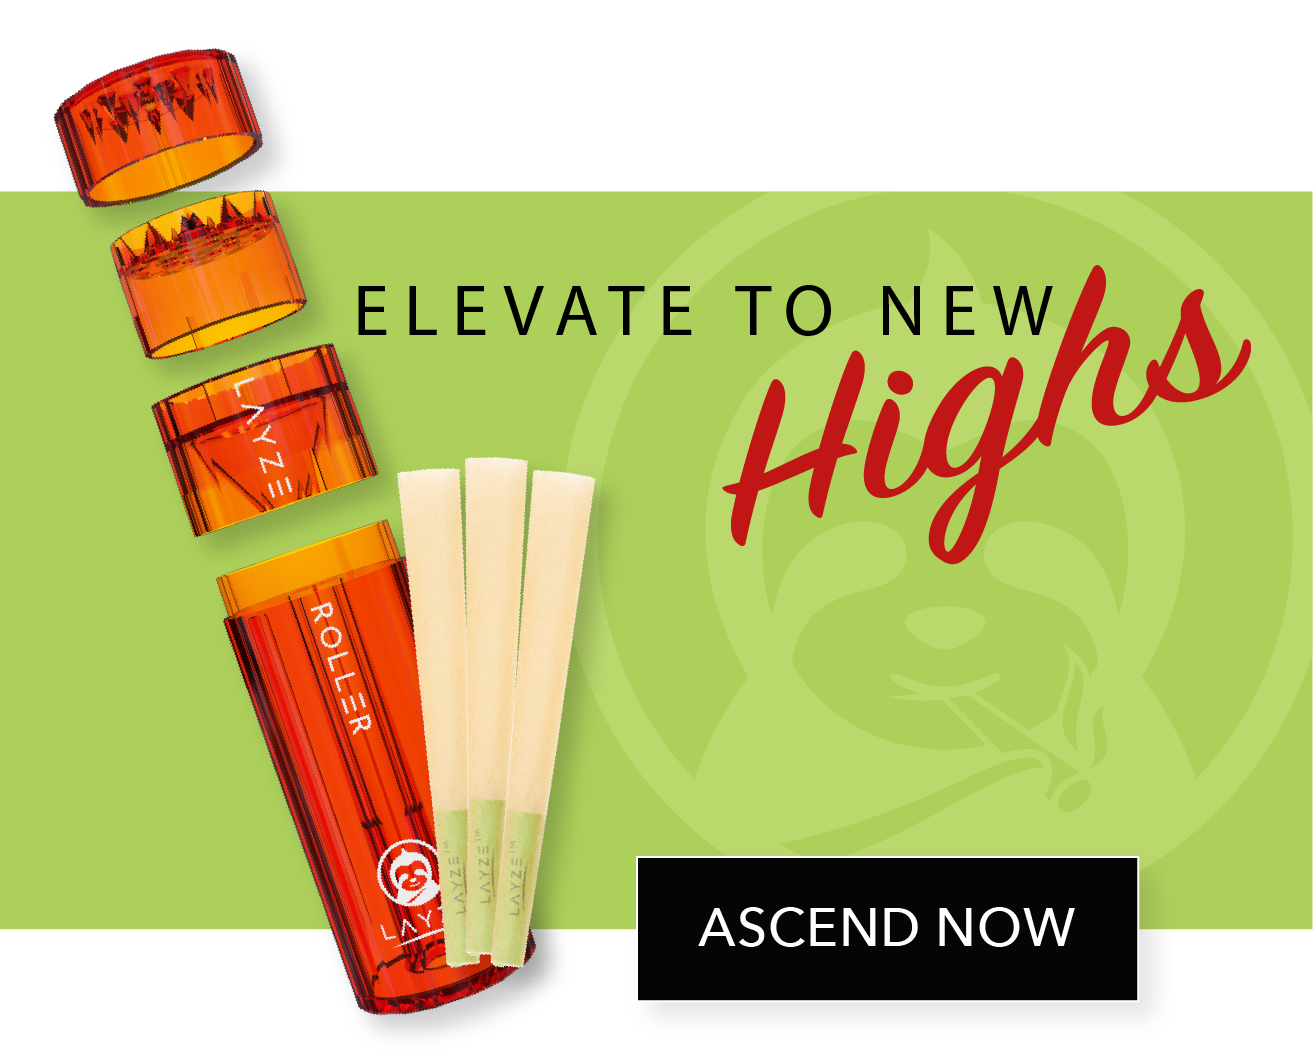 GETLAYZE
SIMPLIFY YOUR LIFE
TROUBLE ROLLING A JOINT?
GET A HIGHROLLER & RELAX